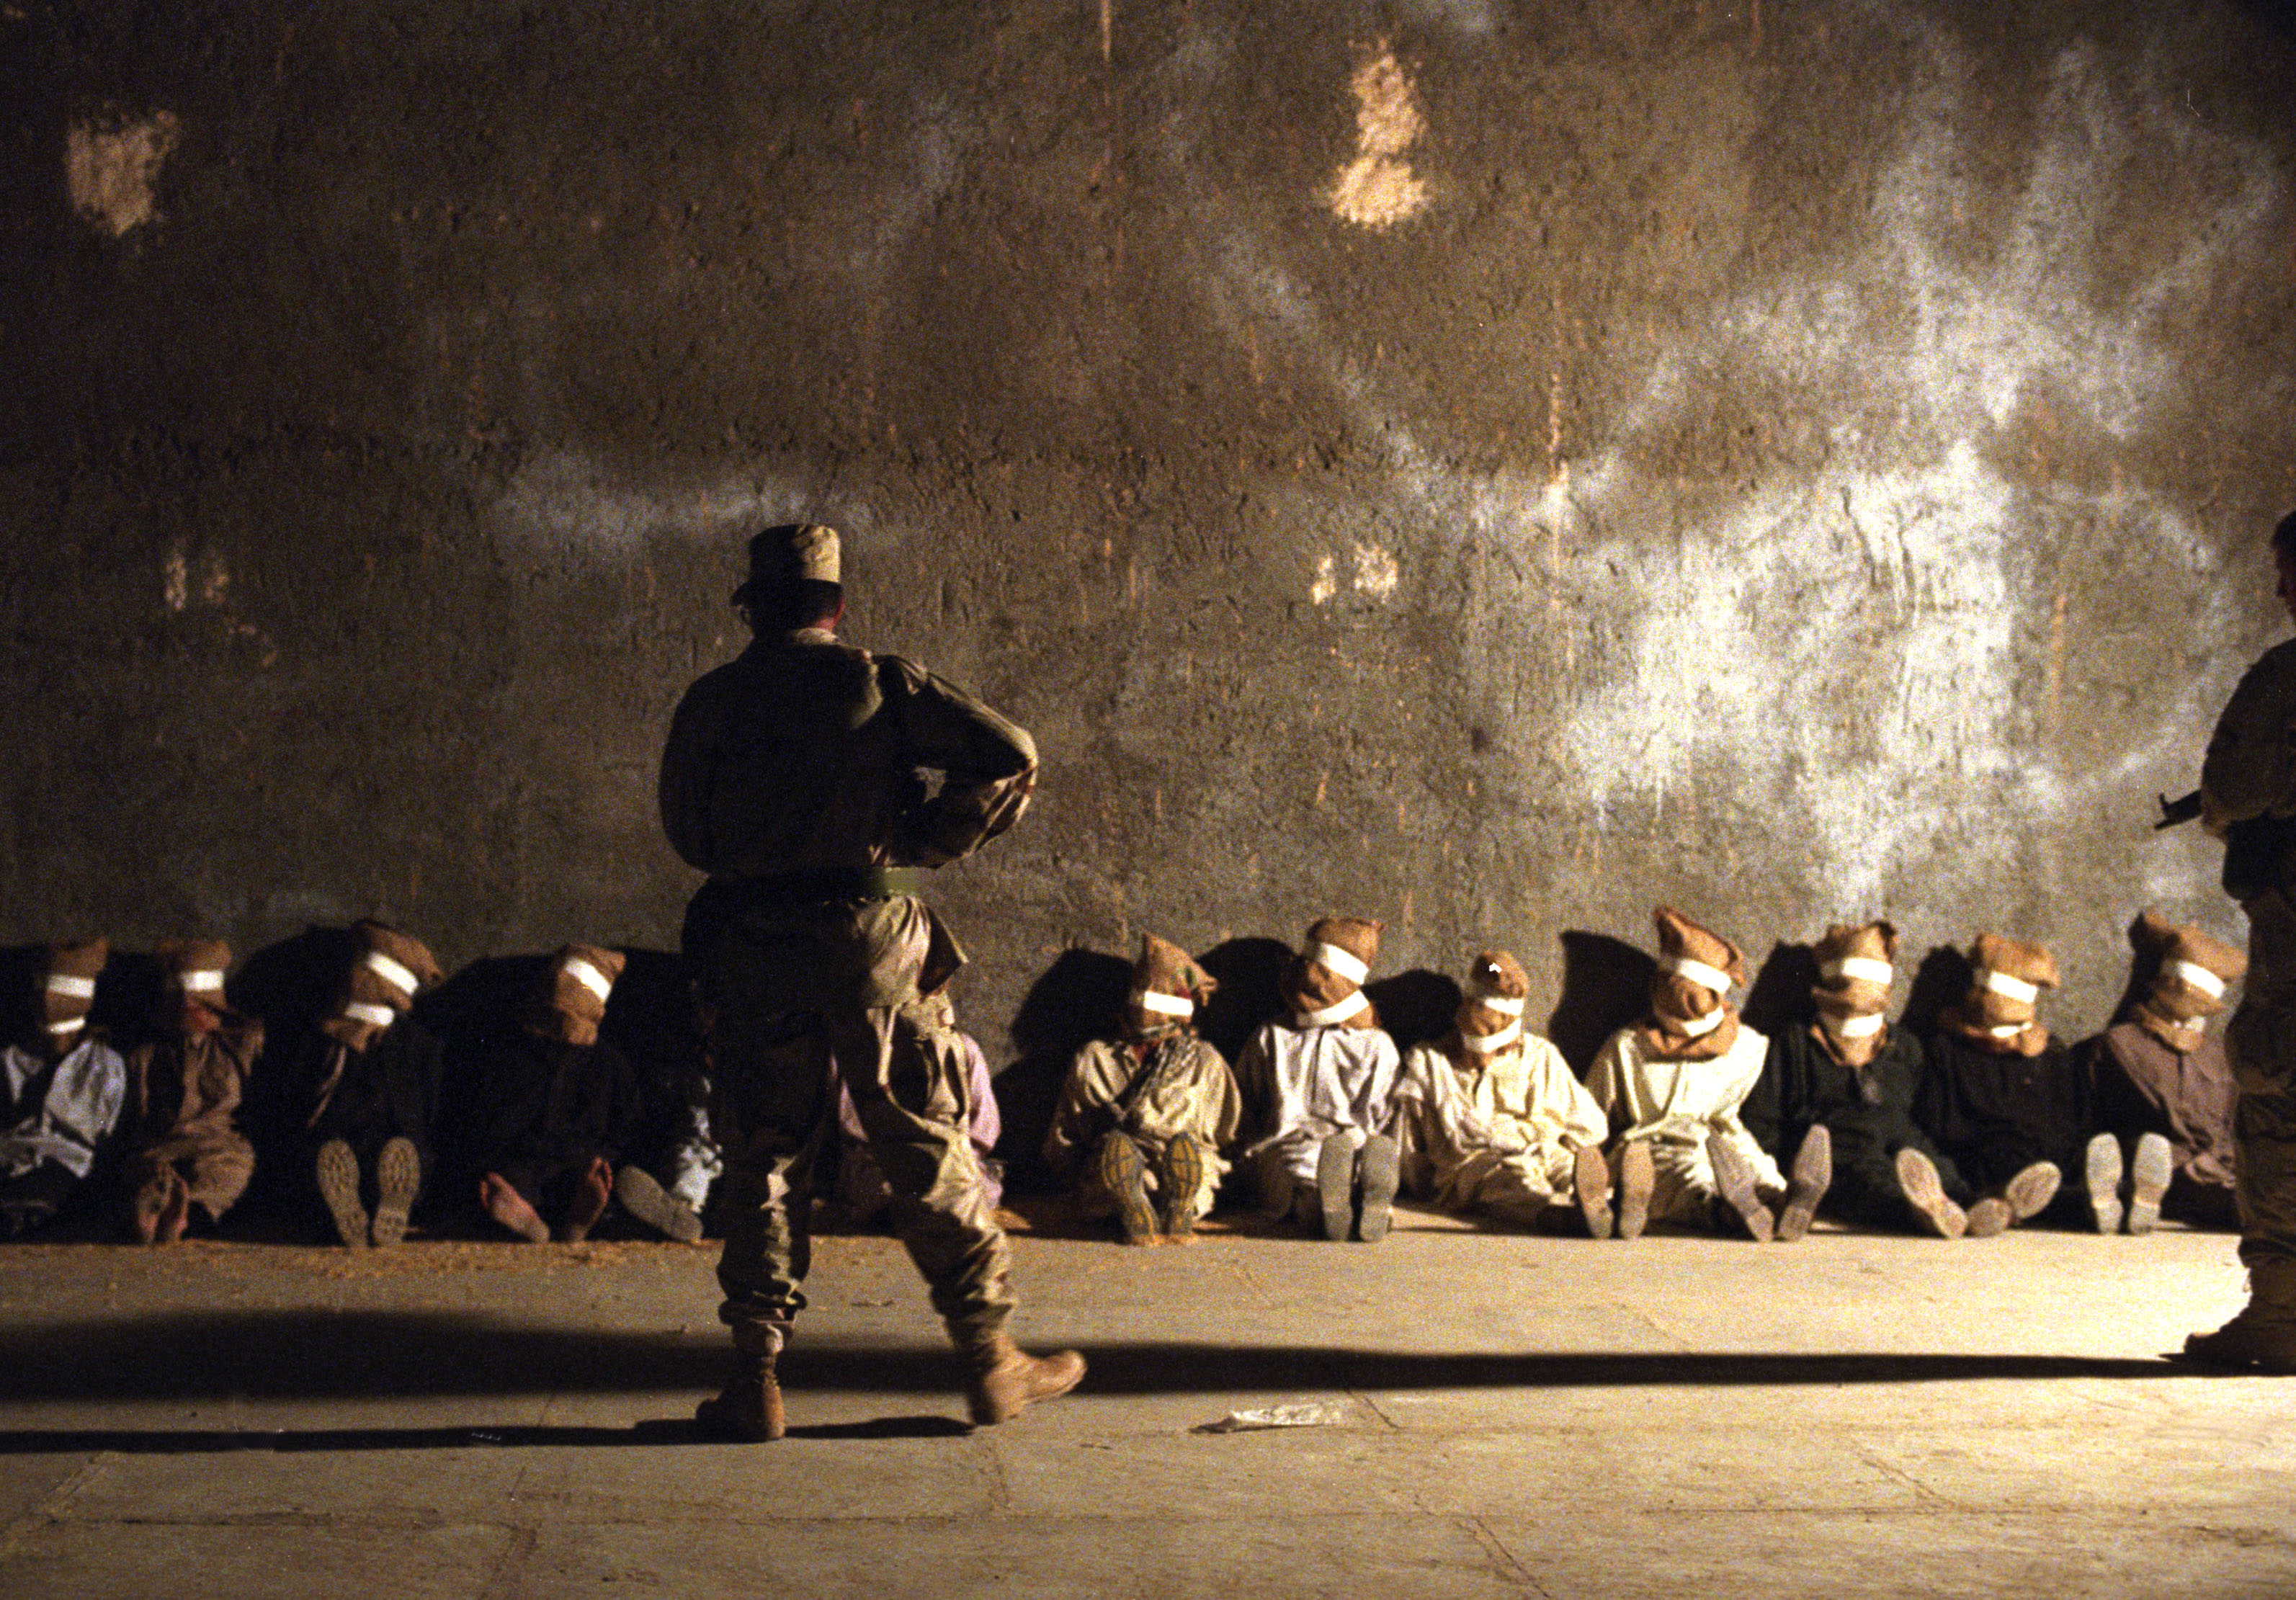 Image from 'The Road to Guantanamo'